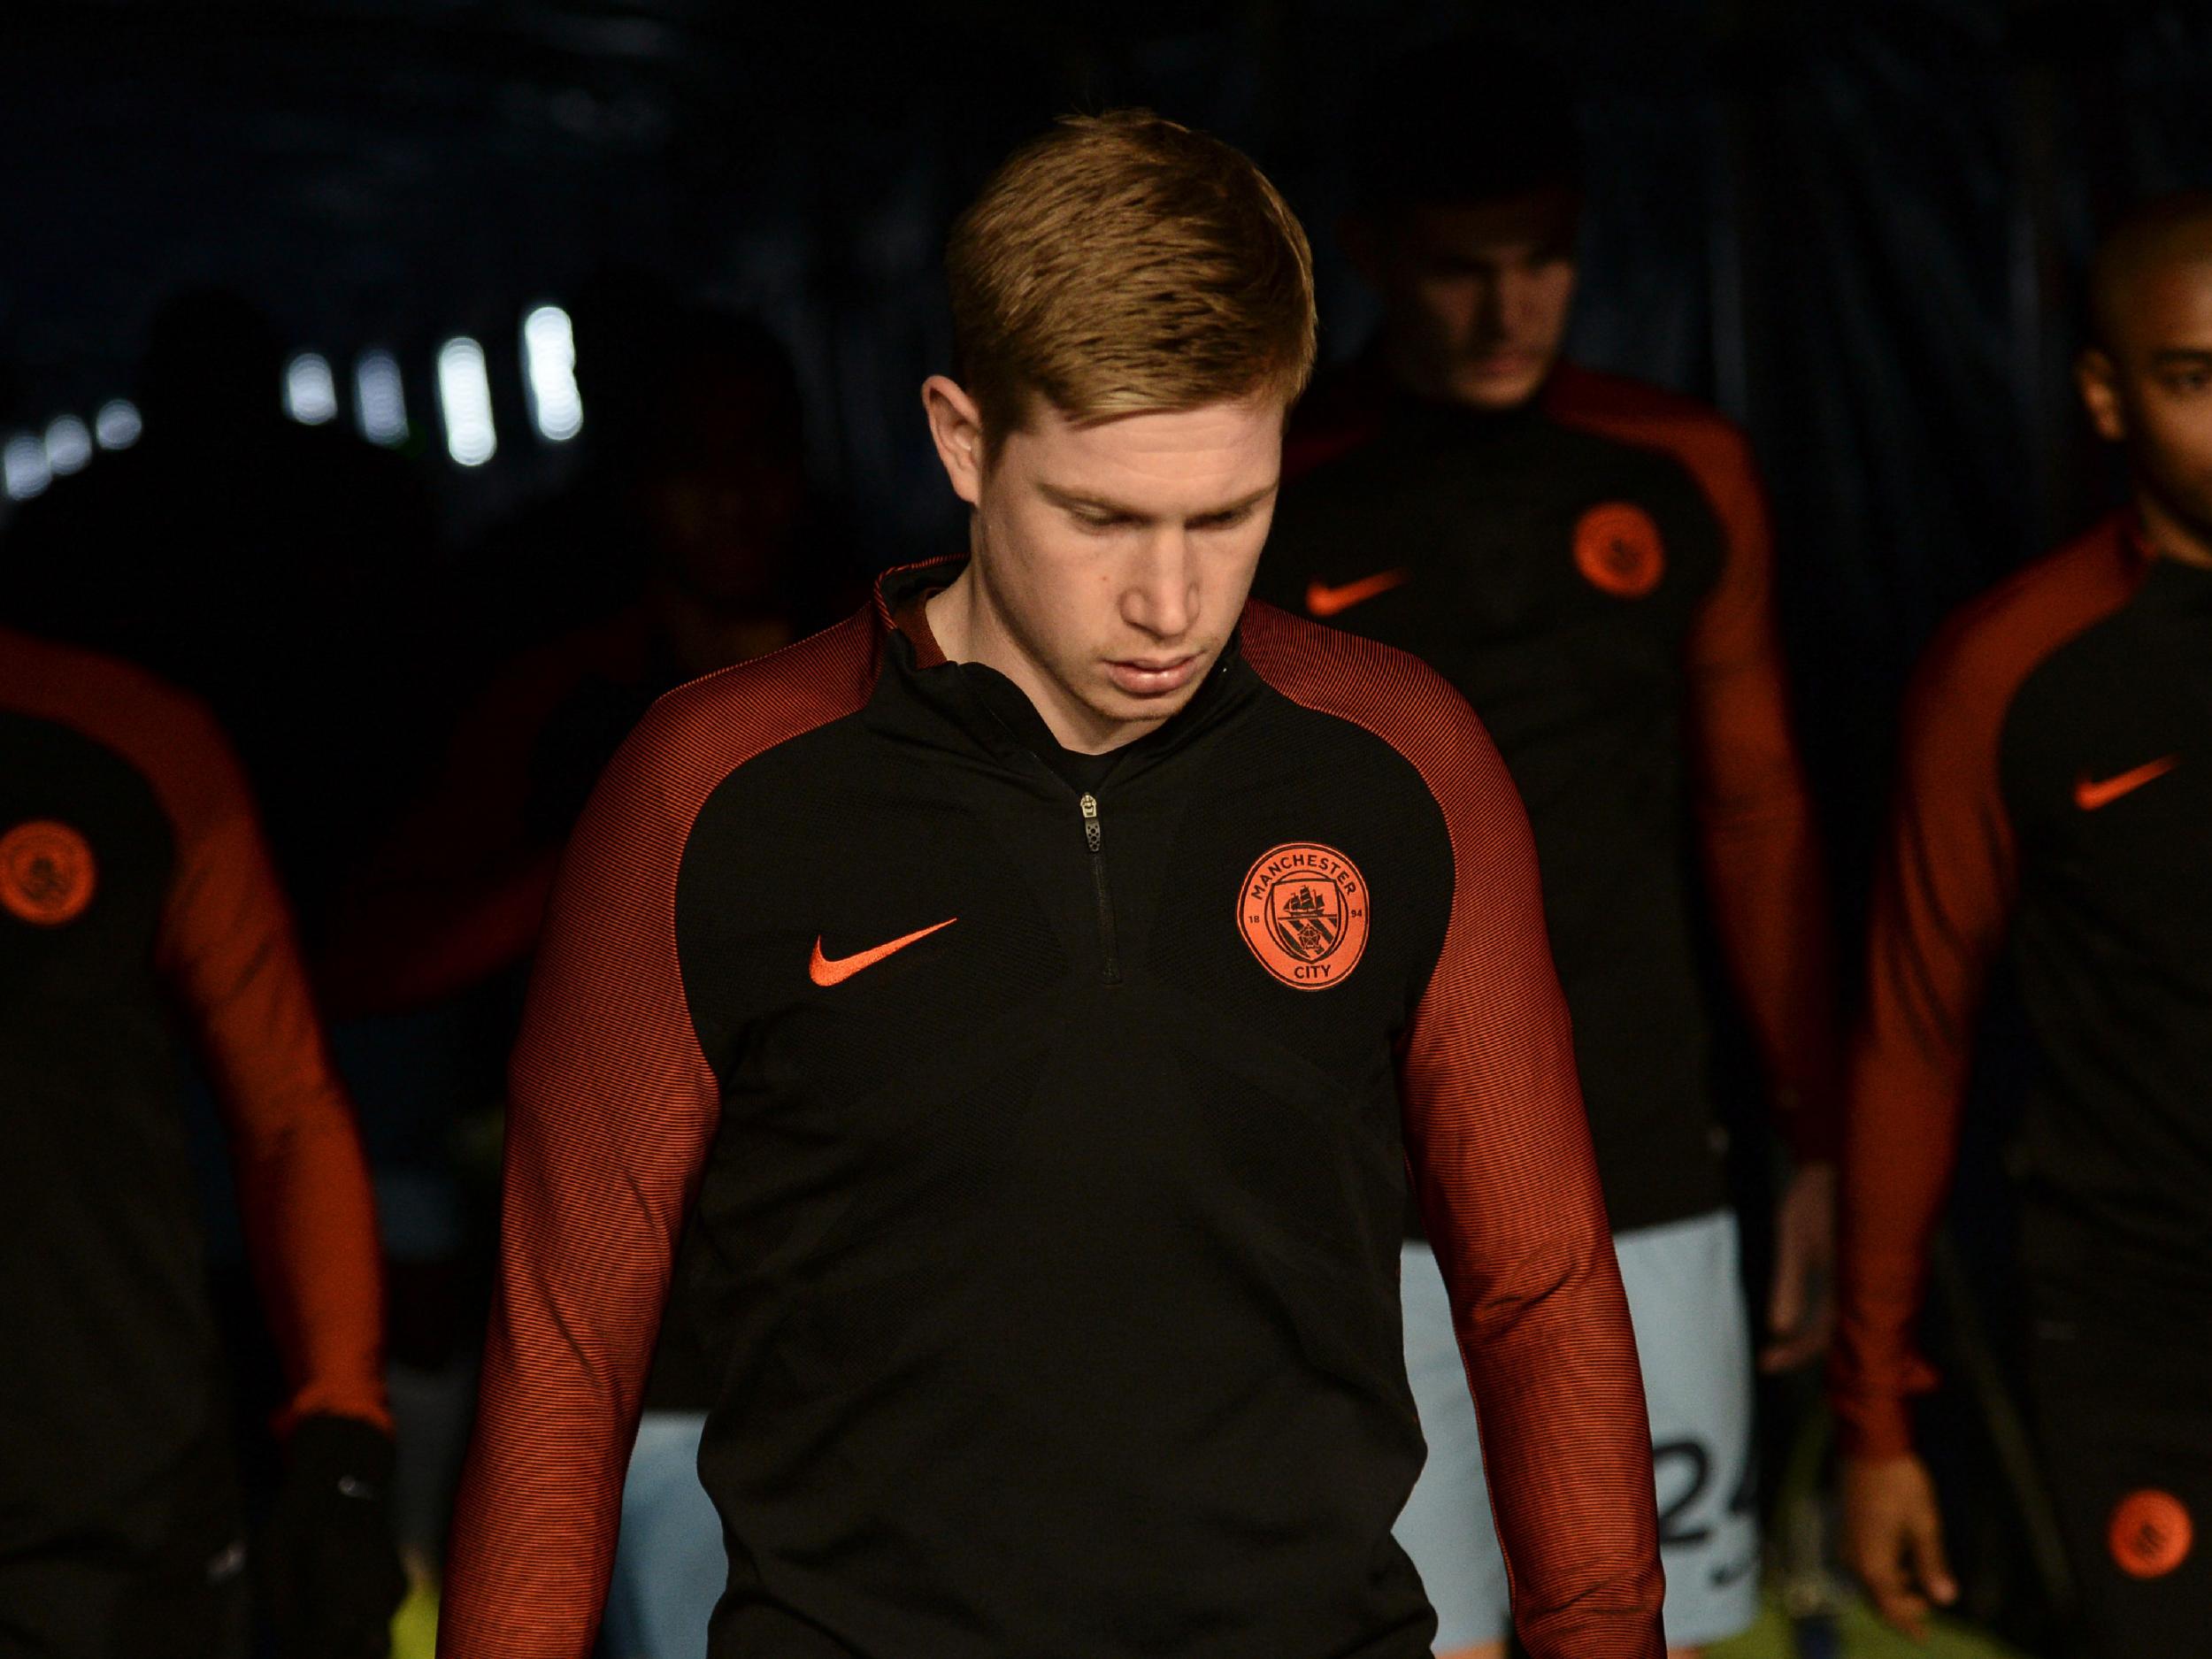 De Bruyne was not considered 100 per cent fit by Belgium